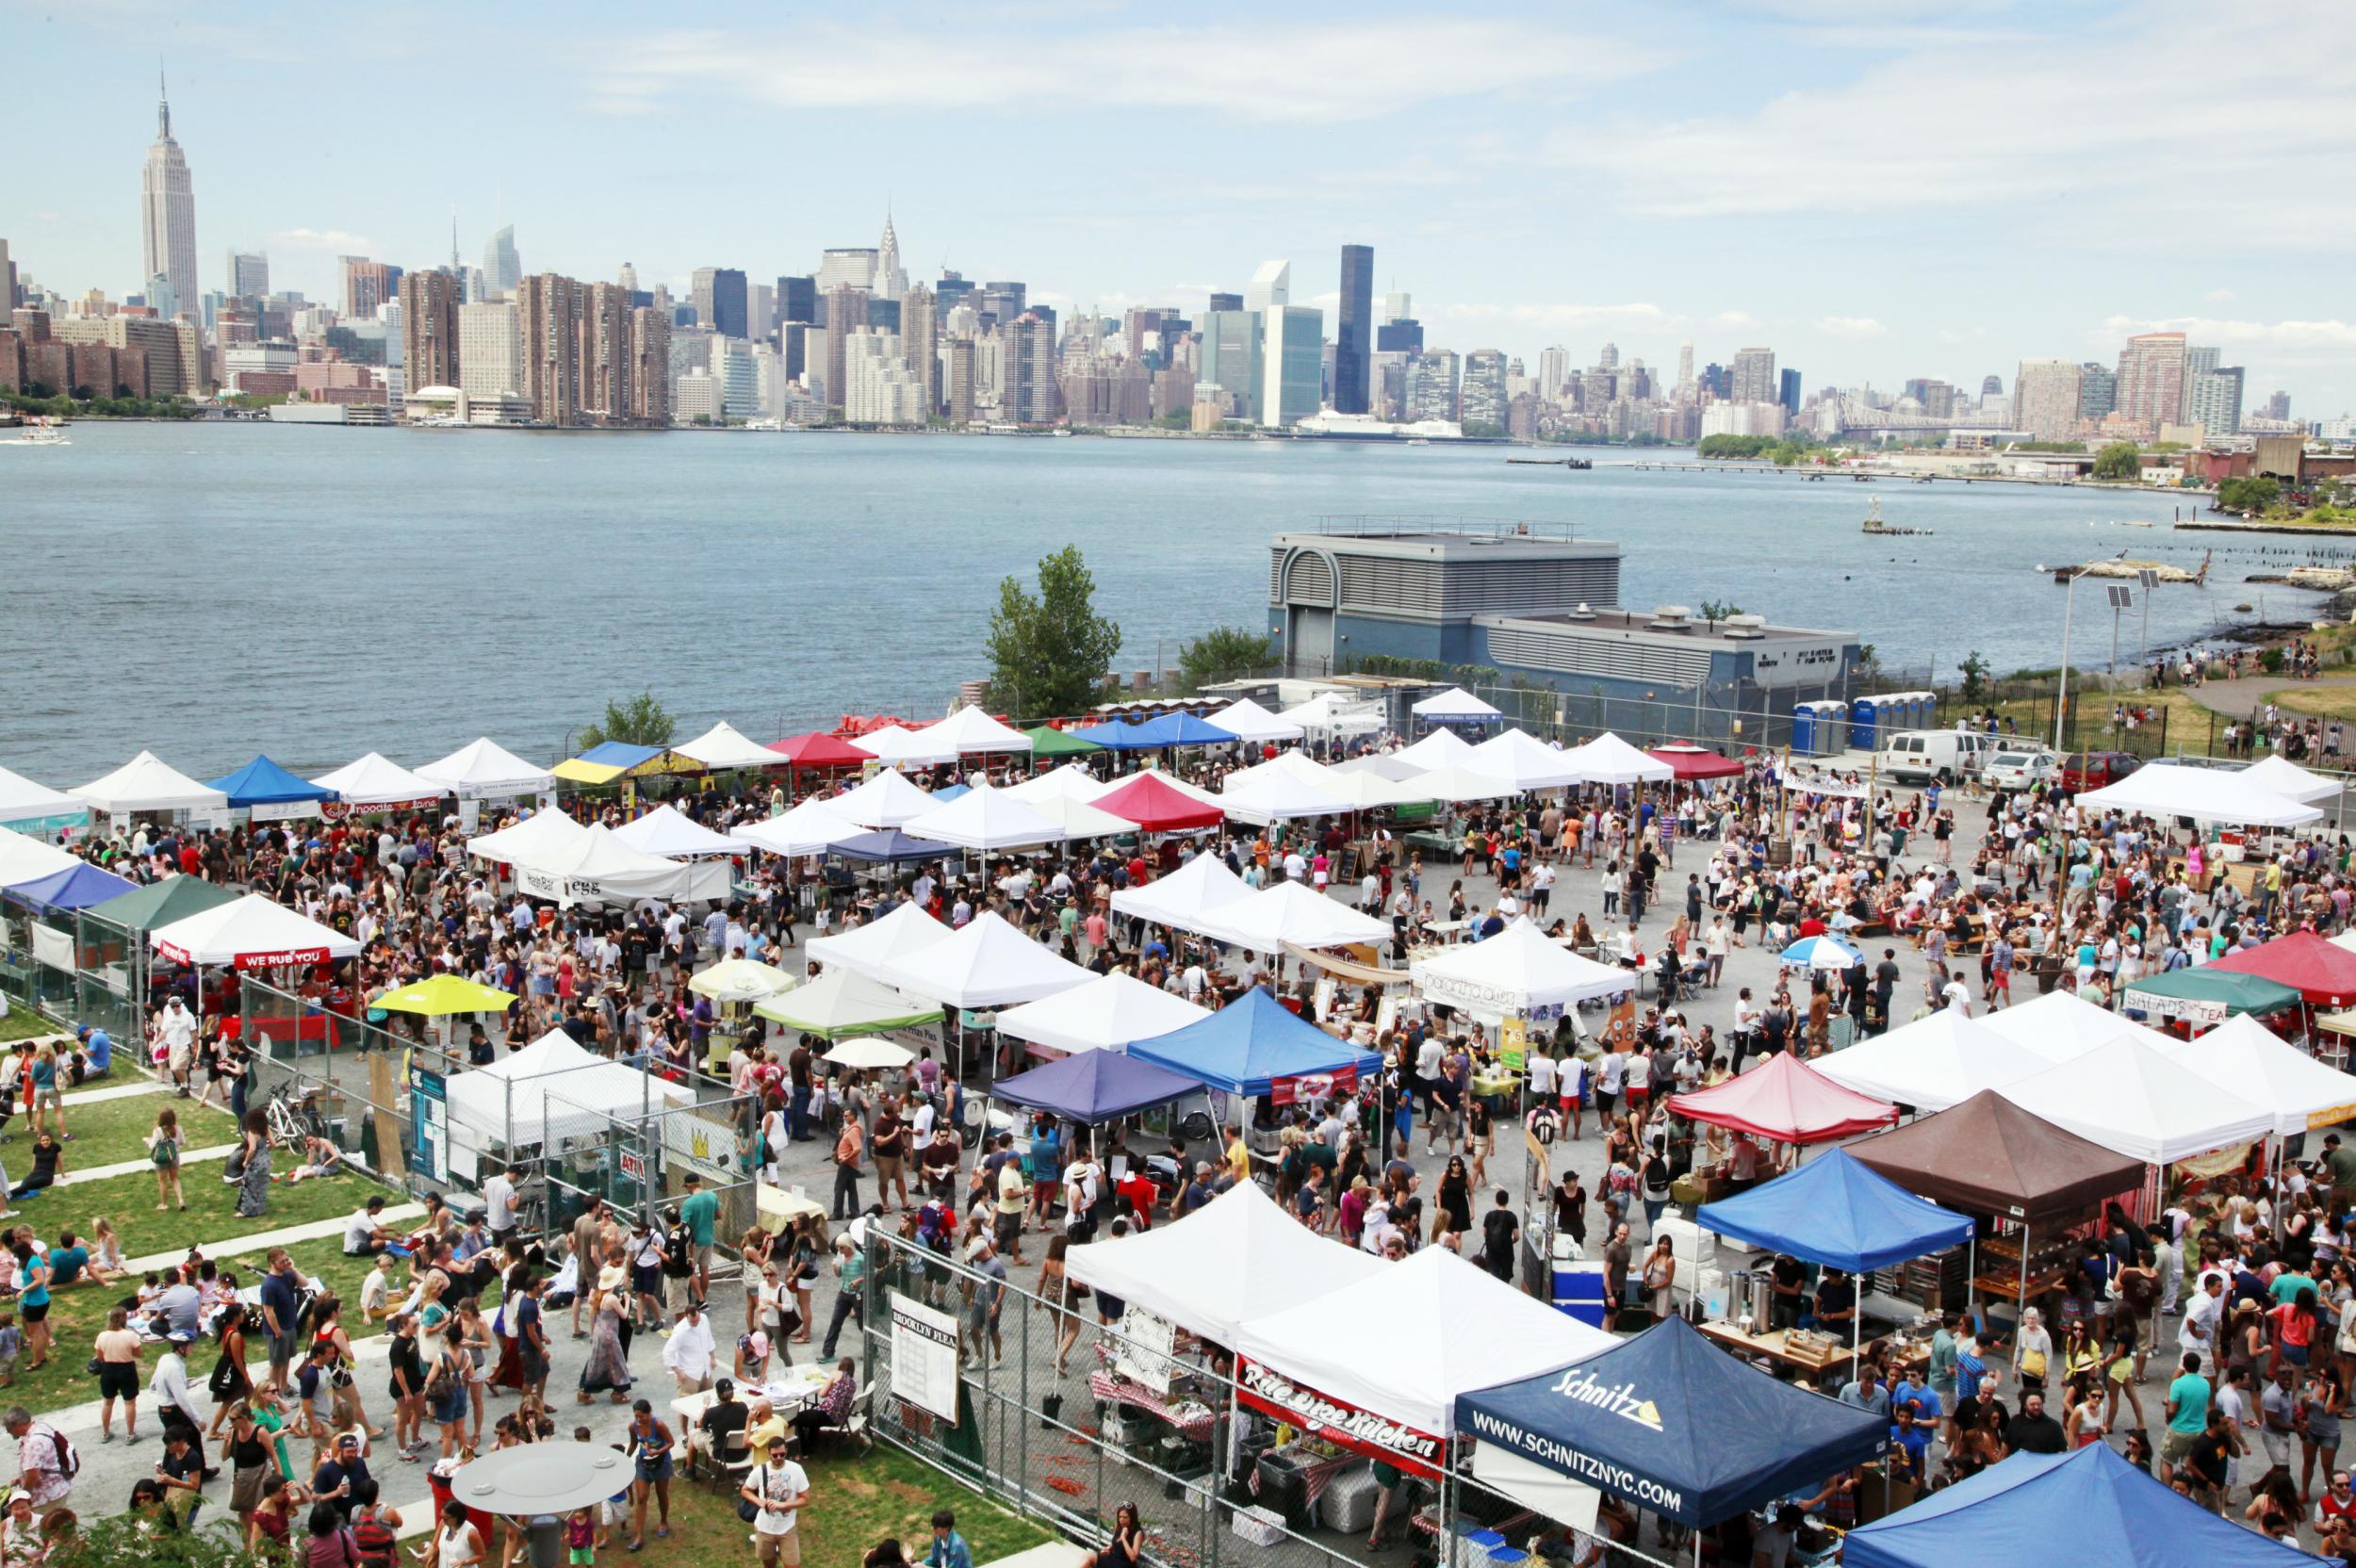 The Smorgasburg market is on every Saturday in East River Park